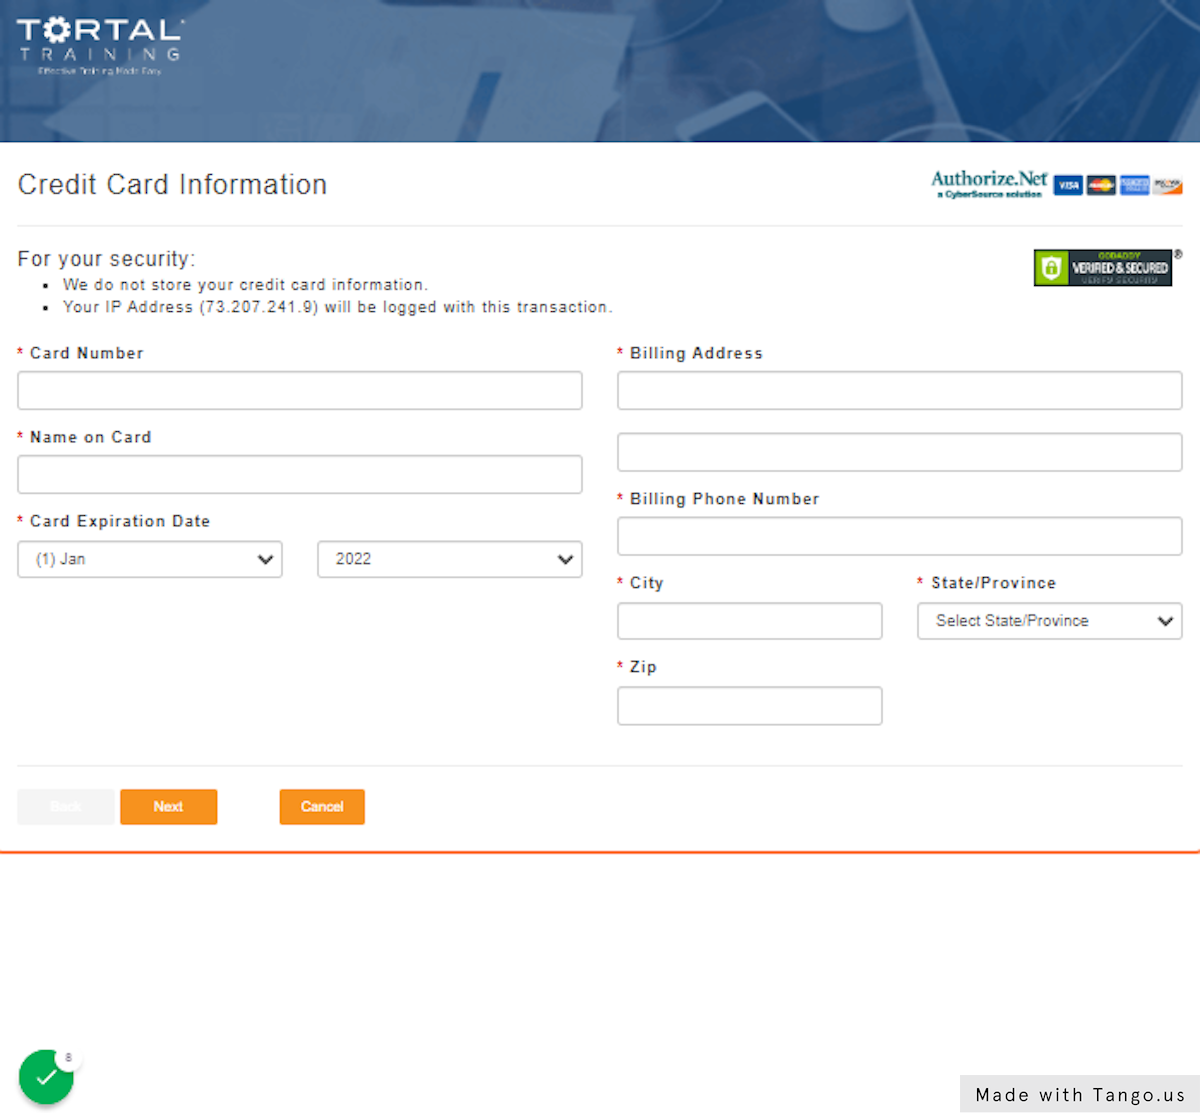 Enter your Payment Information - Click Next when Complete